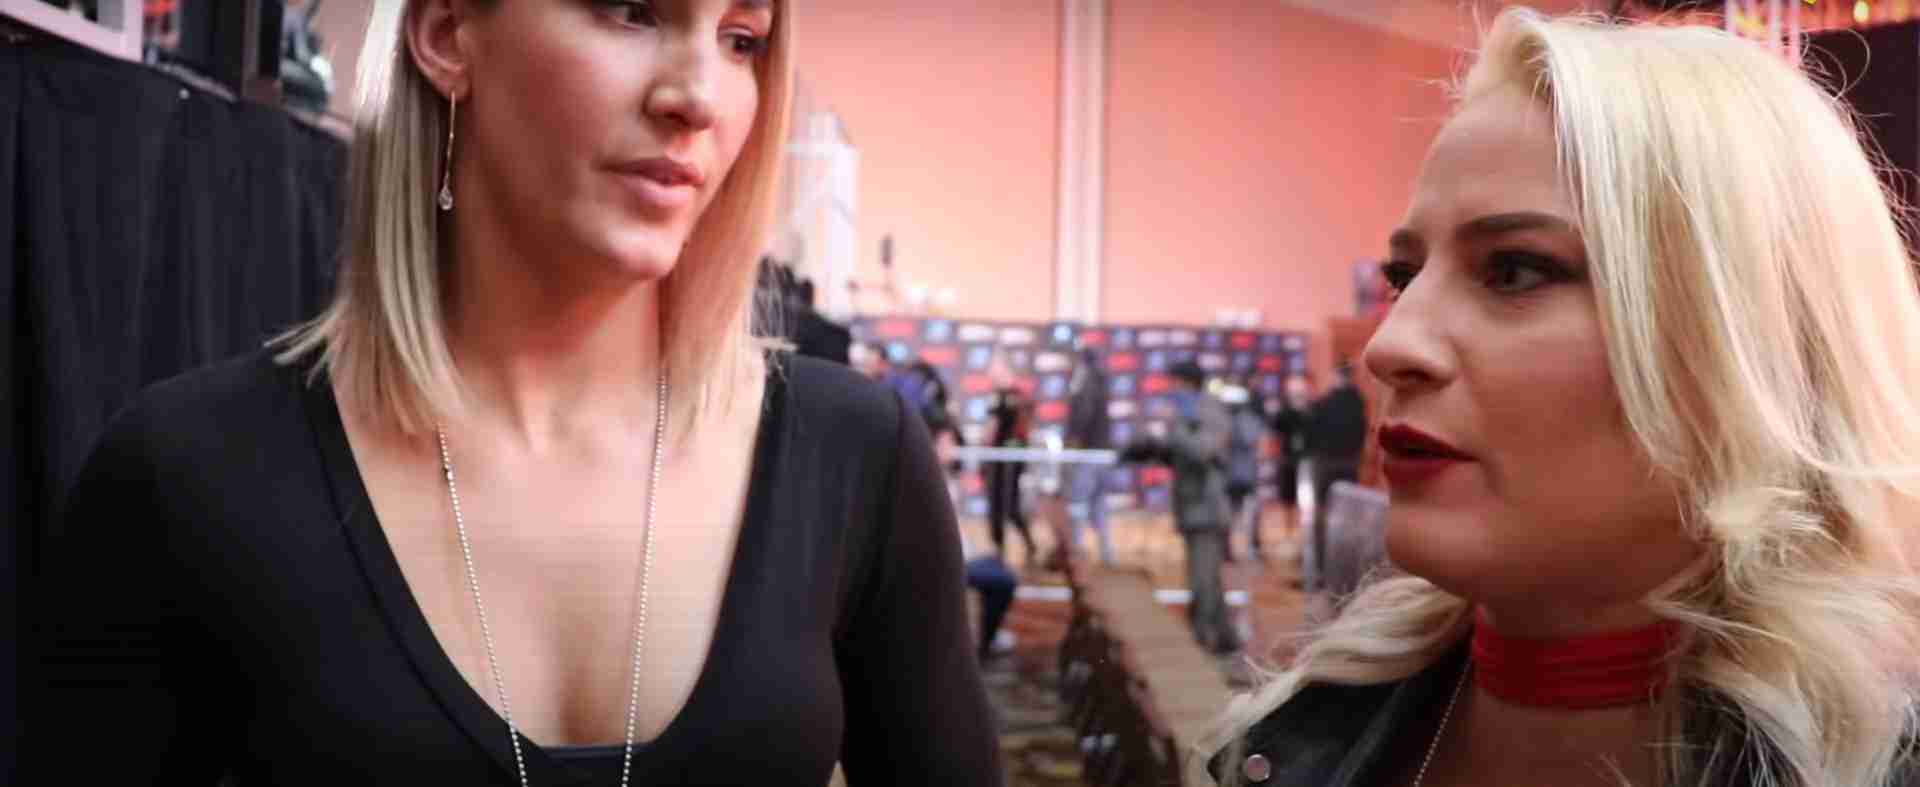 Blonde boxing beauty reveals extraordinary boxing trainer story